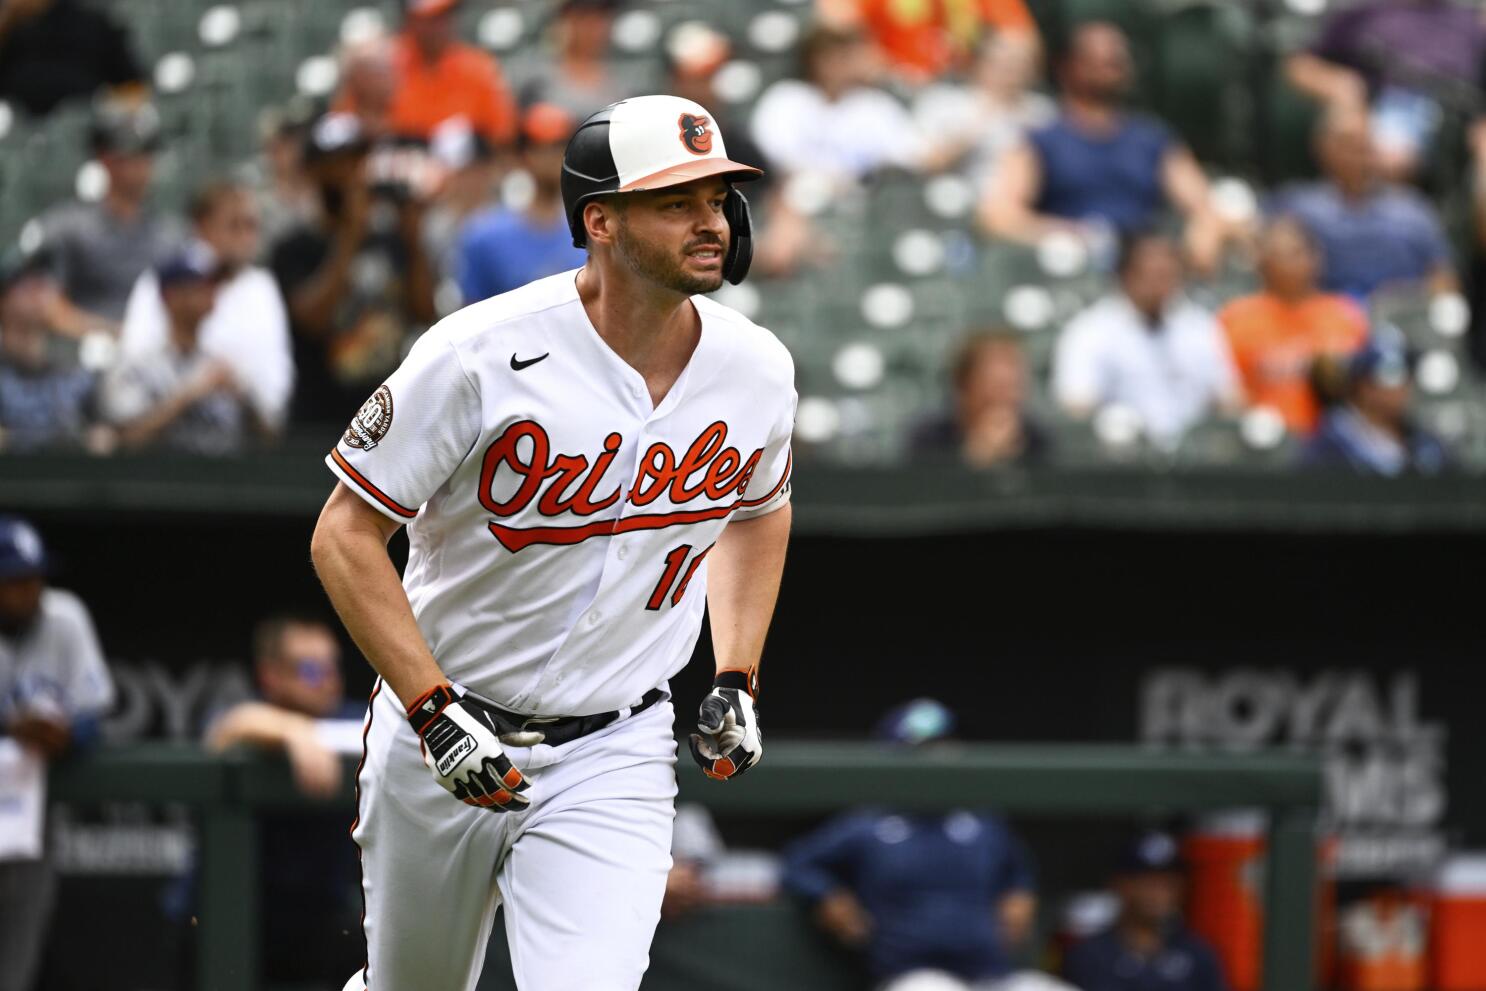 Houston Astros star Trey Mancini shares a special moment with his